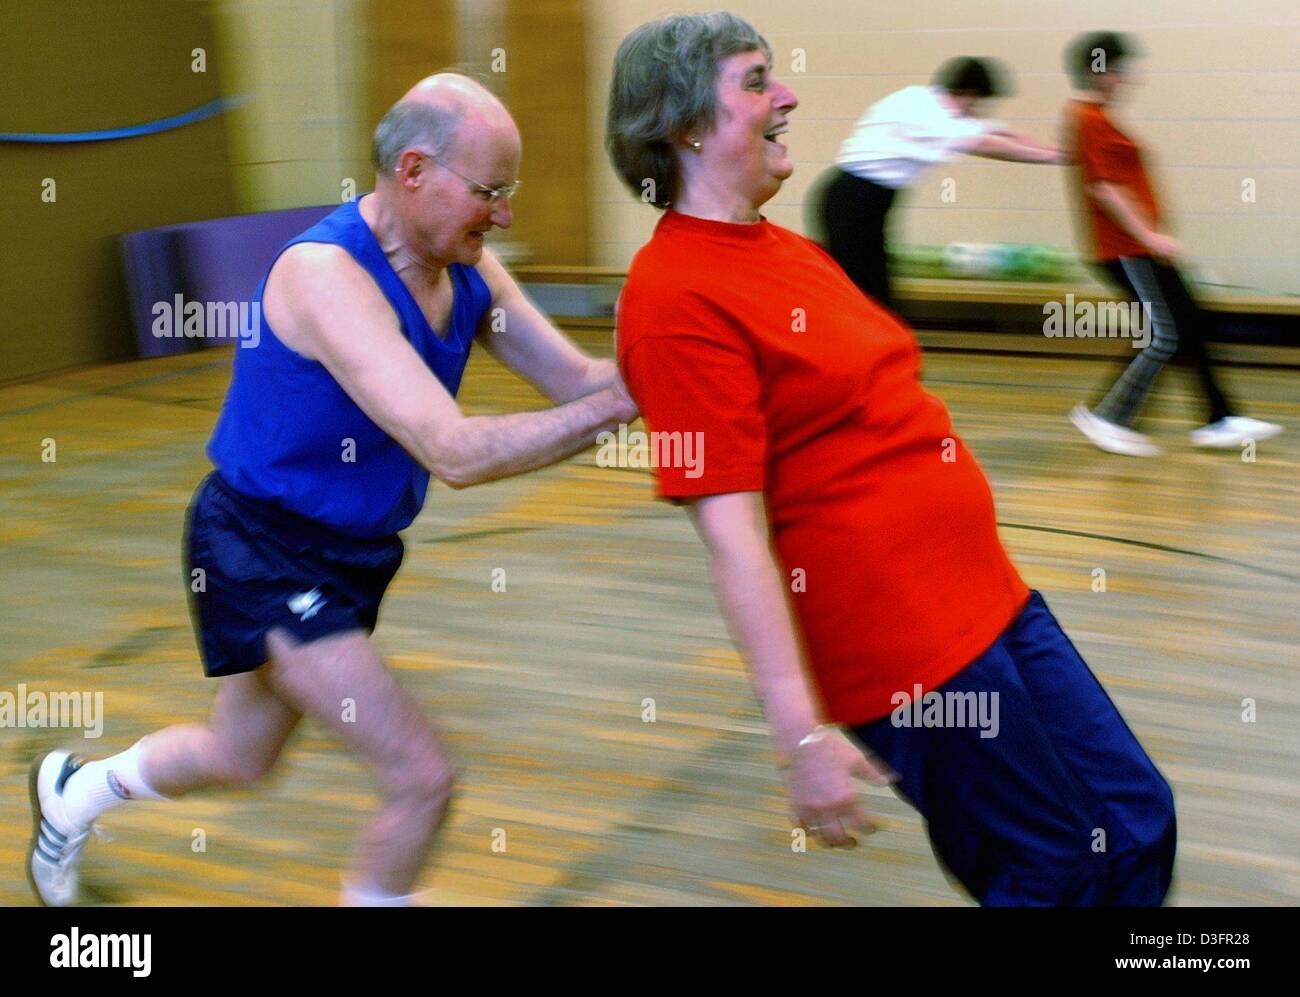 (dpa) - A couple of senior citizens conduct a sporting excersise during an exercise programme at a sports club in Berlin, 28 April 2003. Senior women and men, members of the sports club, are keeping fit through sporting exercises. The Berlin regional sports association has around 529,529 members. 122,506 are over the age of 50. 23.1 percent are active in sports groups for seniors.  Stock Photo